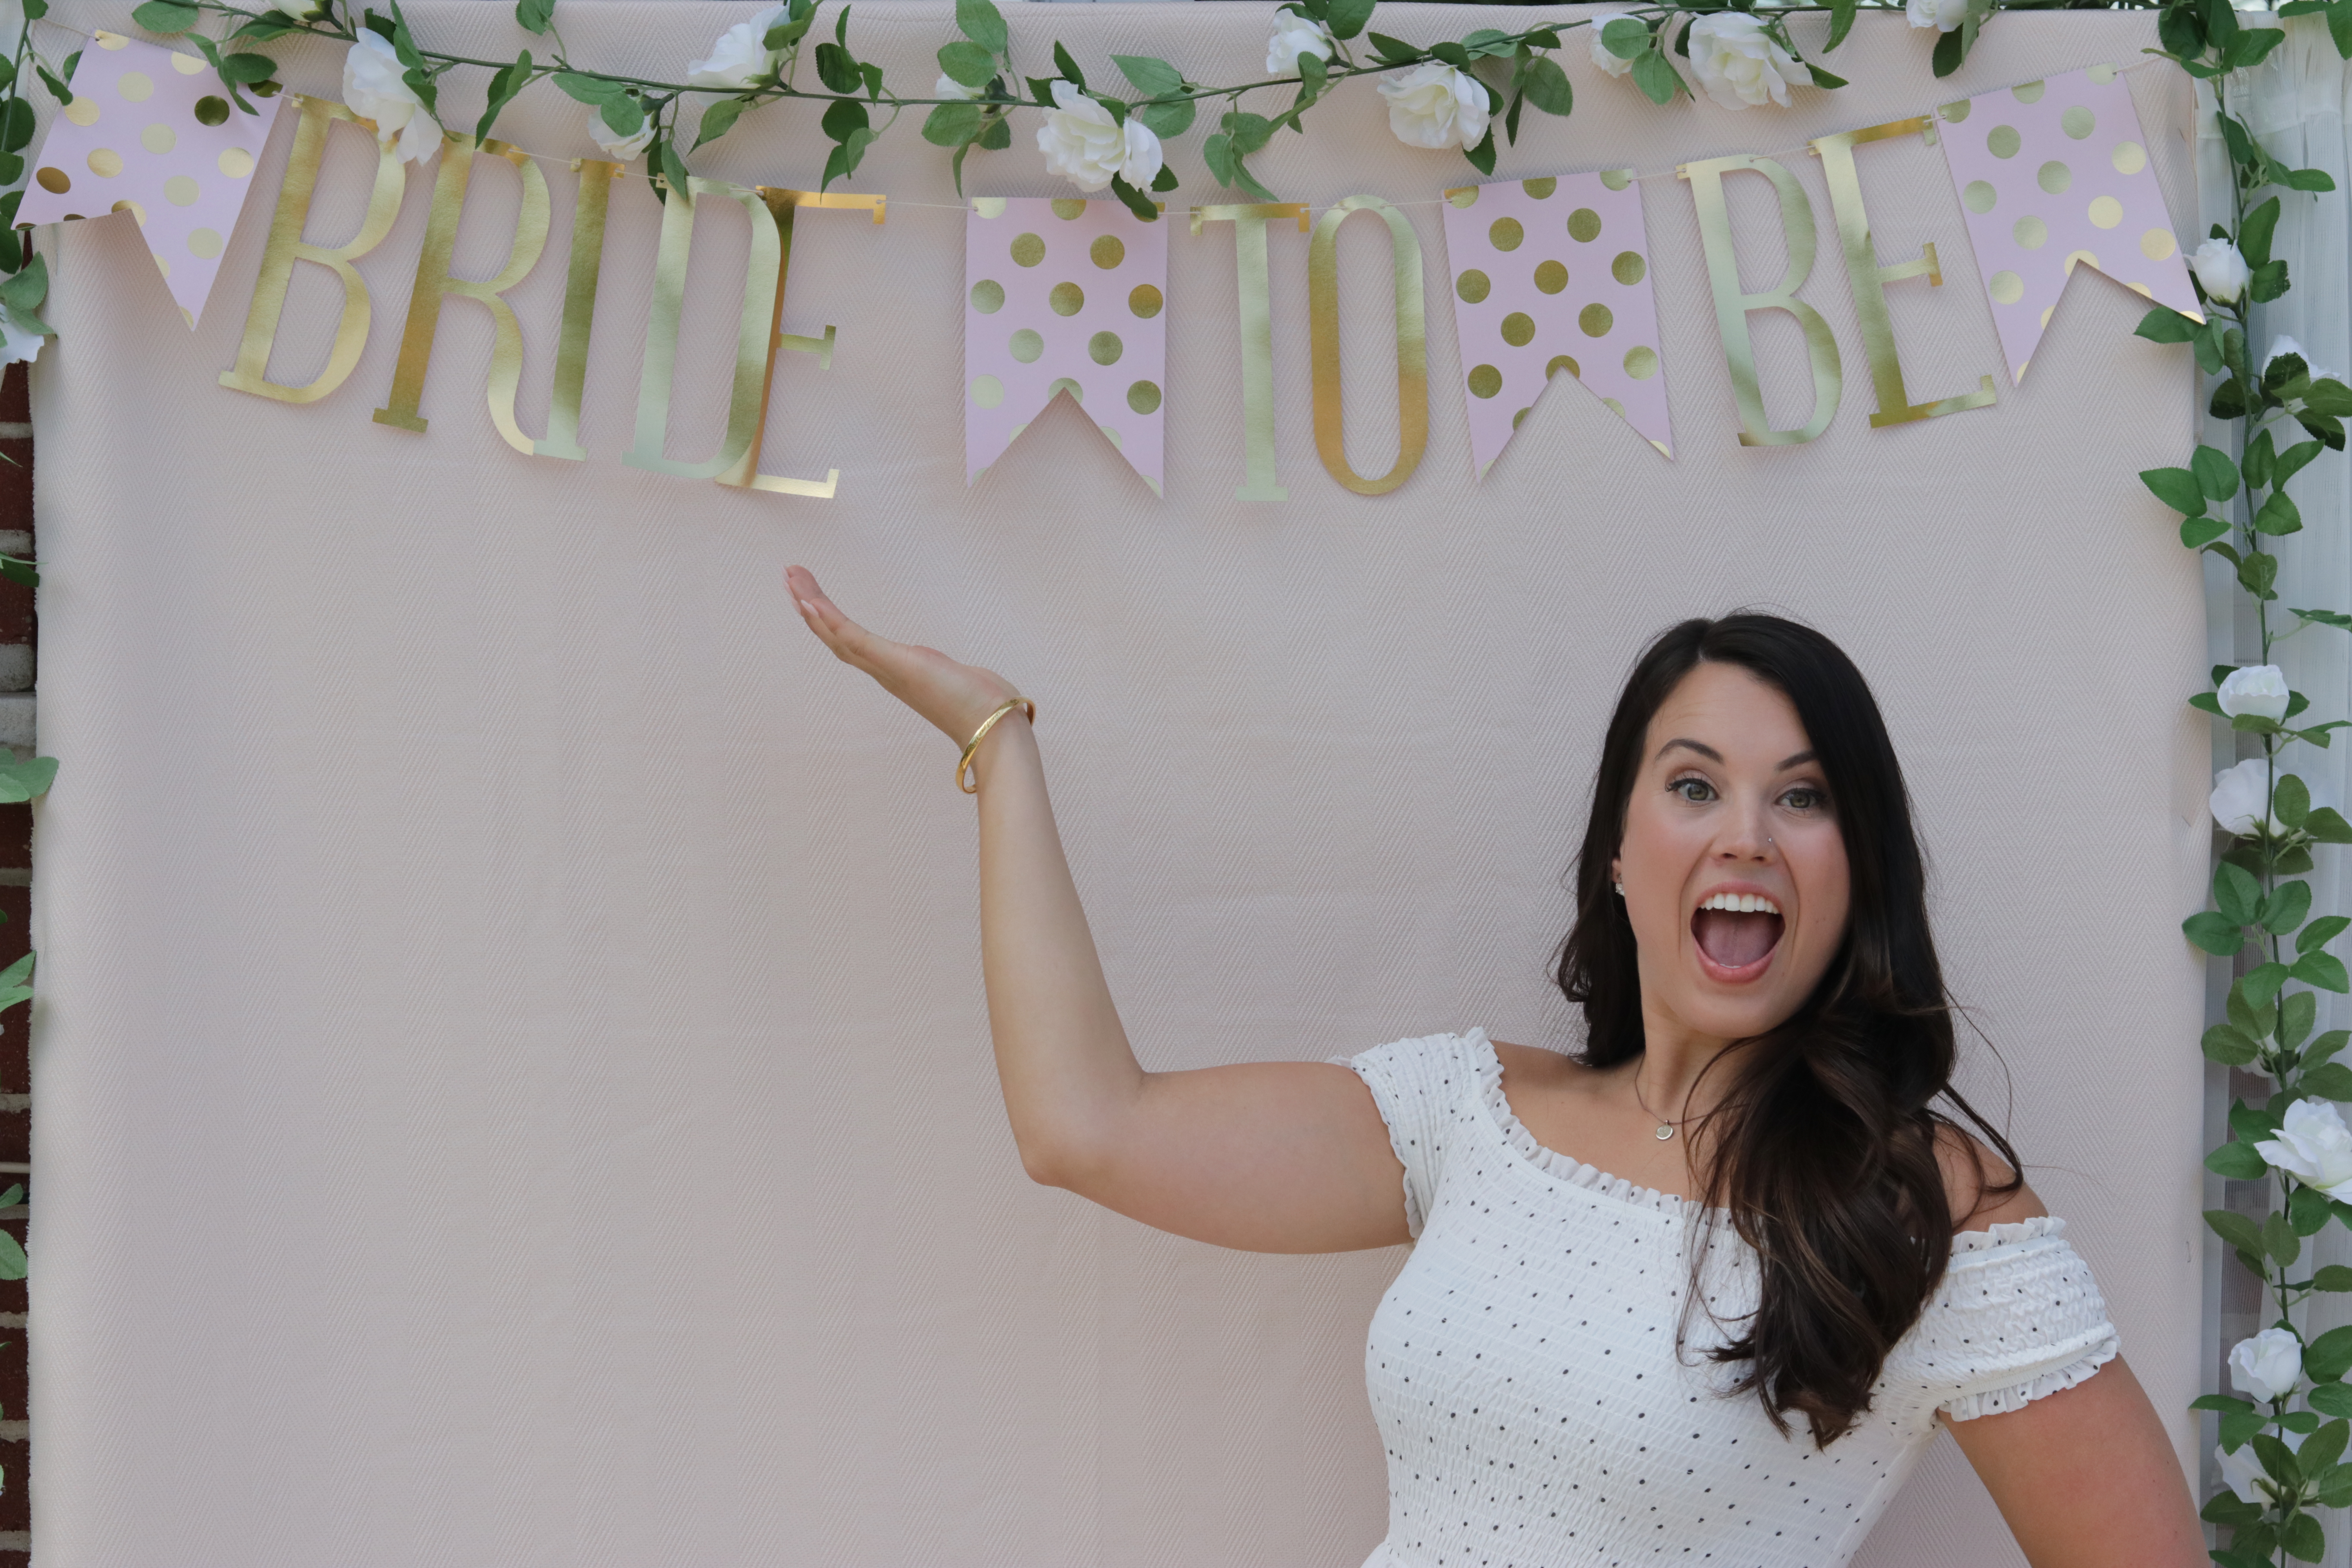 My Outdoor Bridal Shower; Pink, blush, gold and white. Games and greenery! Photo Booth backdrop display. Cookies, appetizers and special blush sangria. Decorating a small tent. Wedding, engagement, bride. 